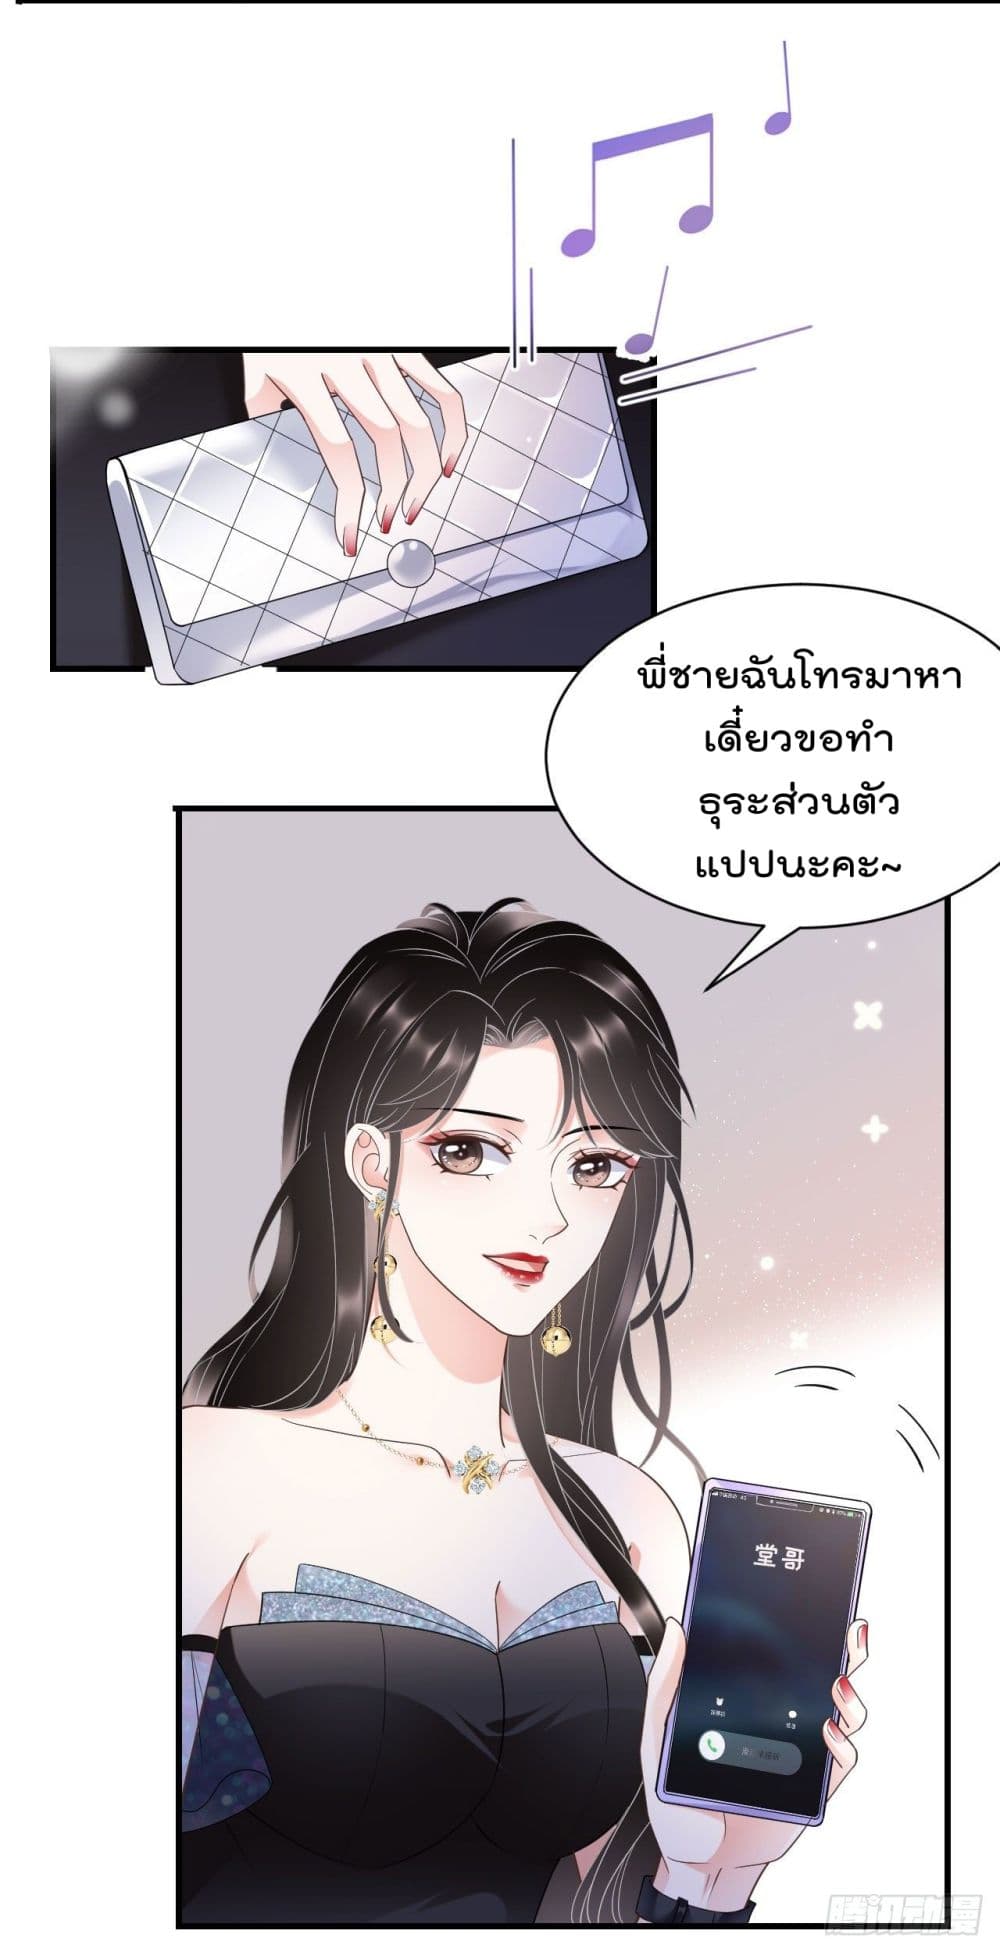 What Can the Eldest Lady Have คุณหนูใหญ่ ทำไมคุณร้ายอย่างนี้ 22-22